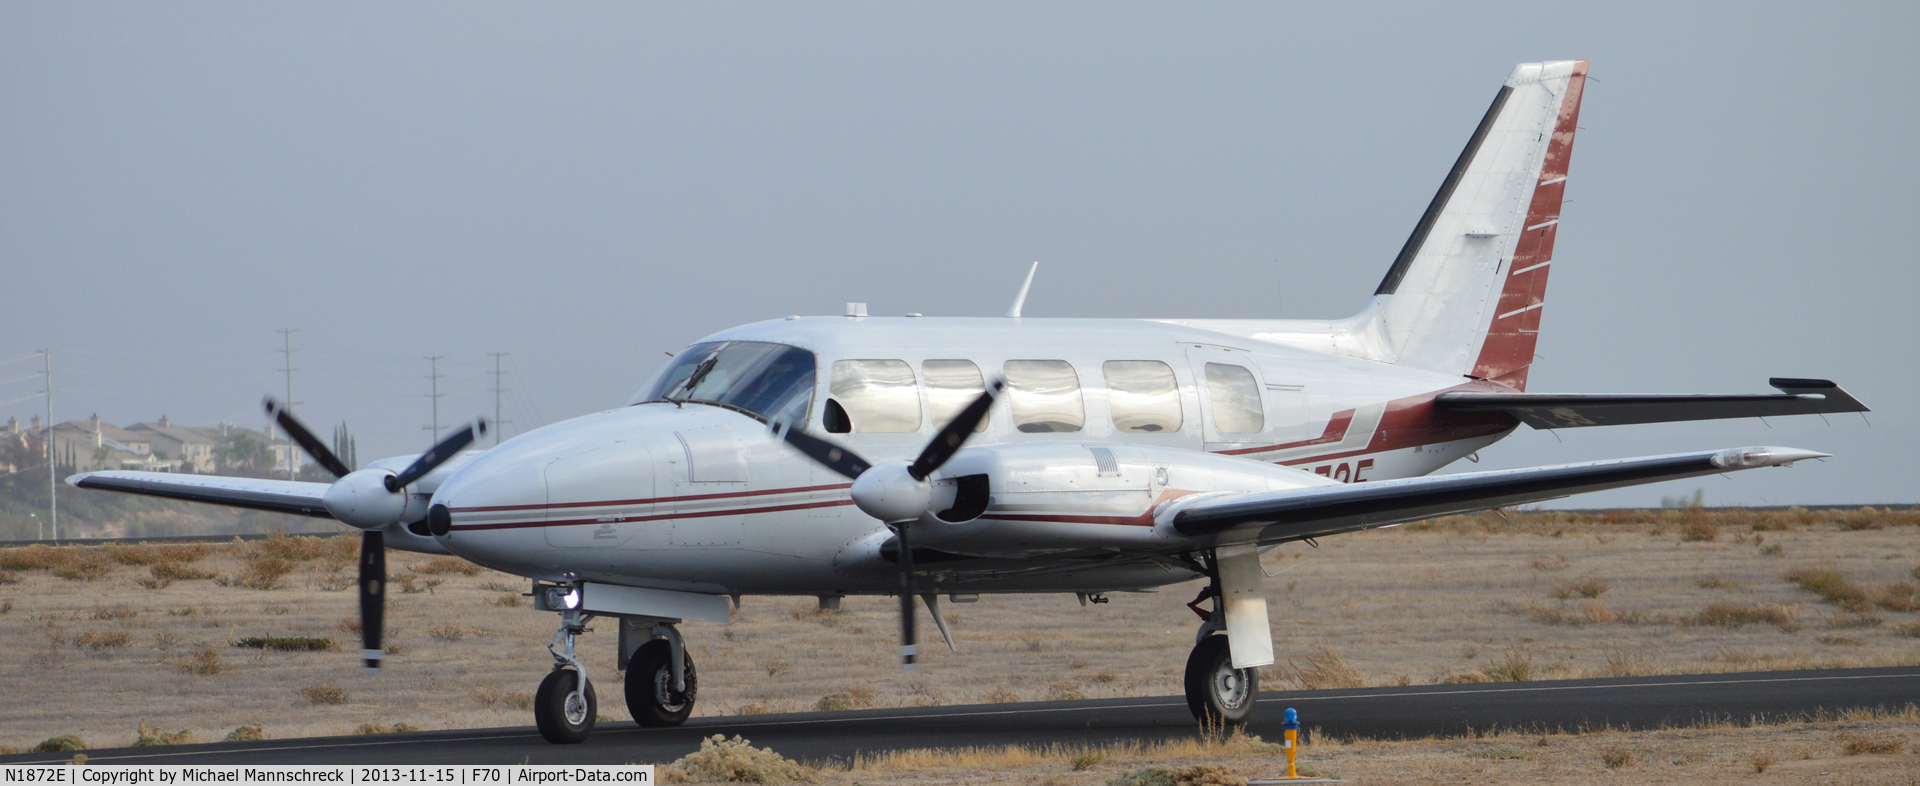 N1872E, 1980 Piper PA-31-350 Chieftain C/N 31-8052114, Taxing to Ramp to pickup passangers